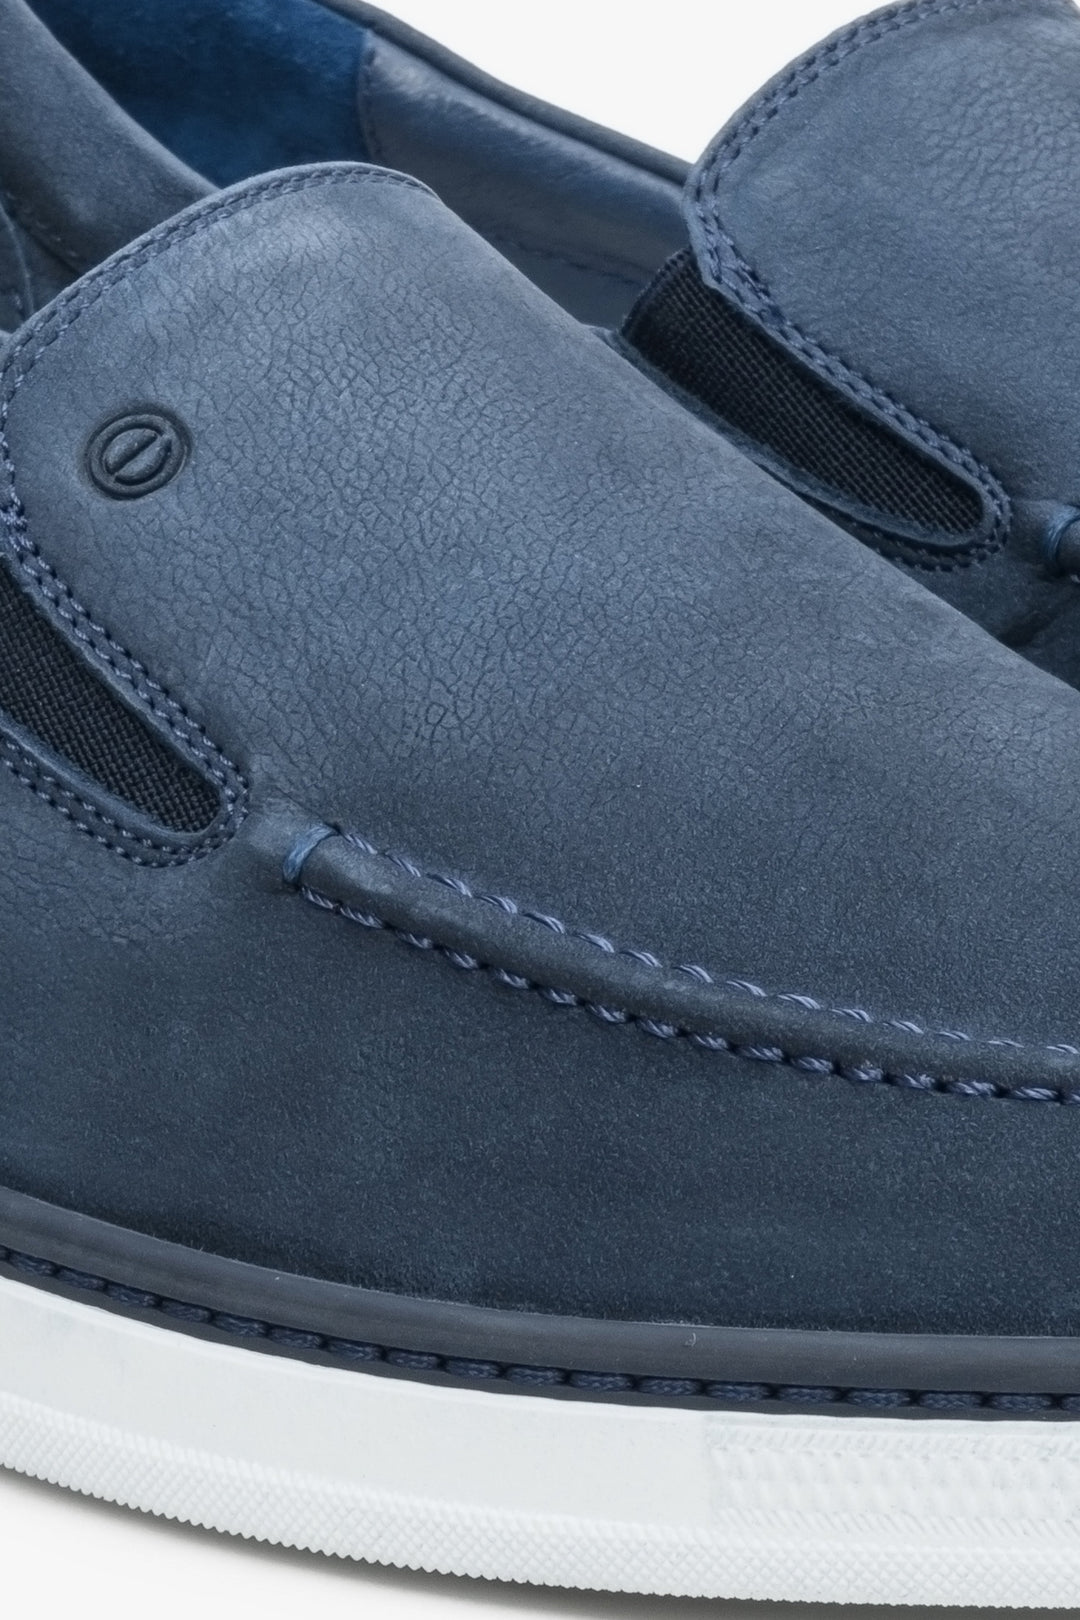 Blue nubuck Estro men's slip-on loafers - close-up of the stitching system.